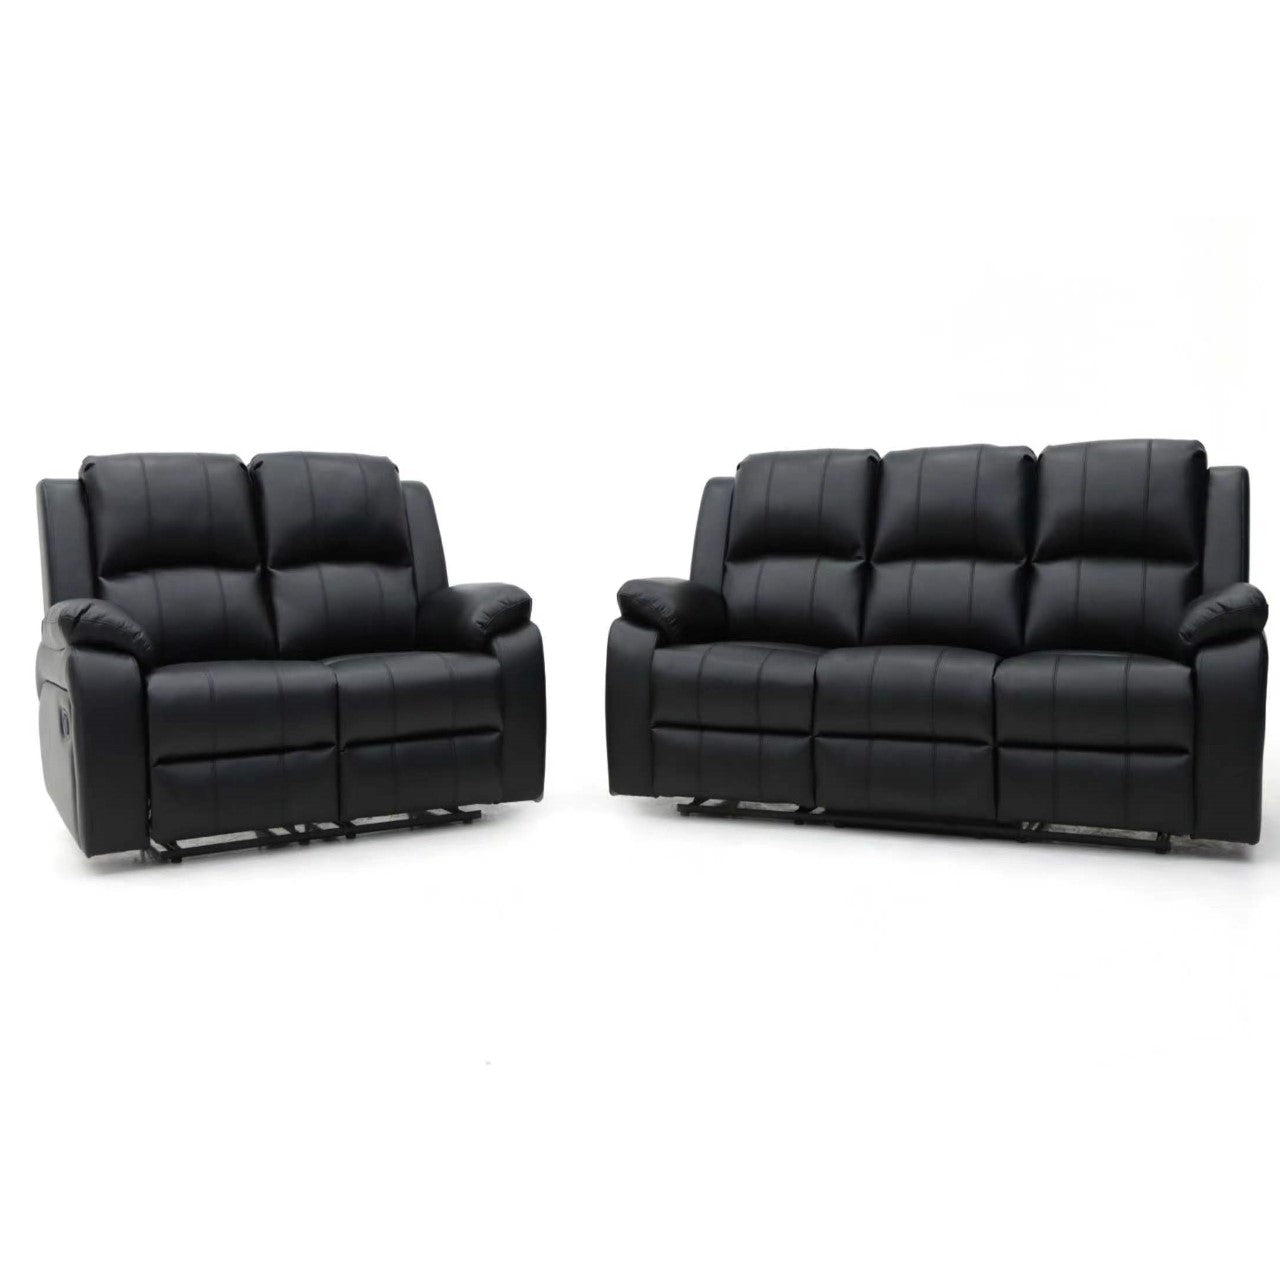 Darwin 3 Seater and 2 Seater Manual Recliner Black Leather